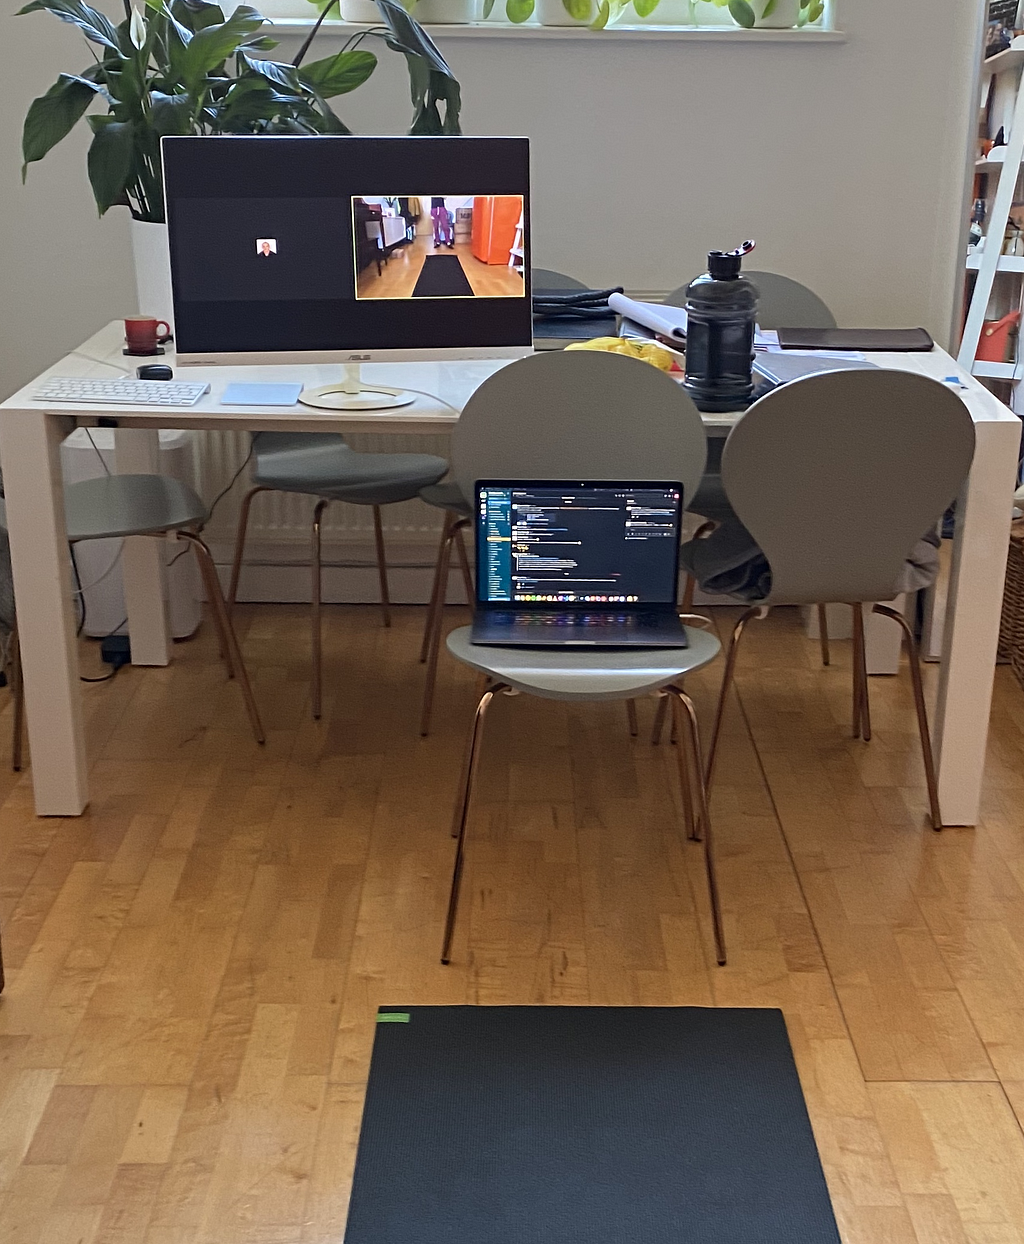 A yoga mat is unrolled on the floor, in front of a forward-facing chair with a laptop on top of it.